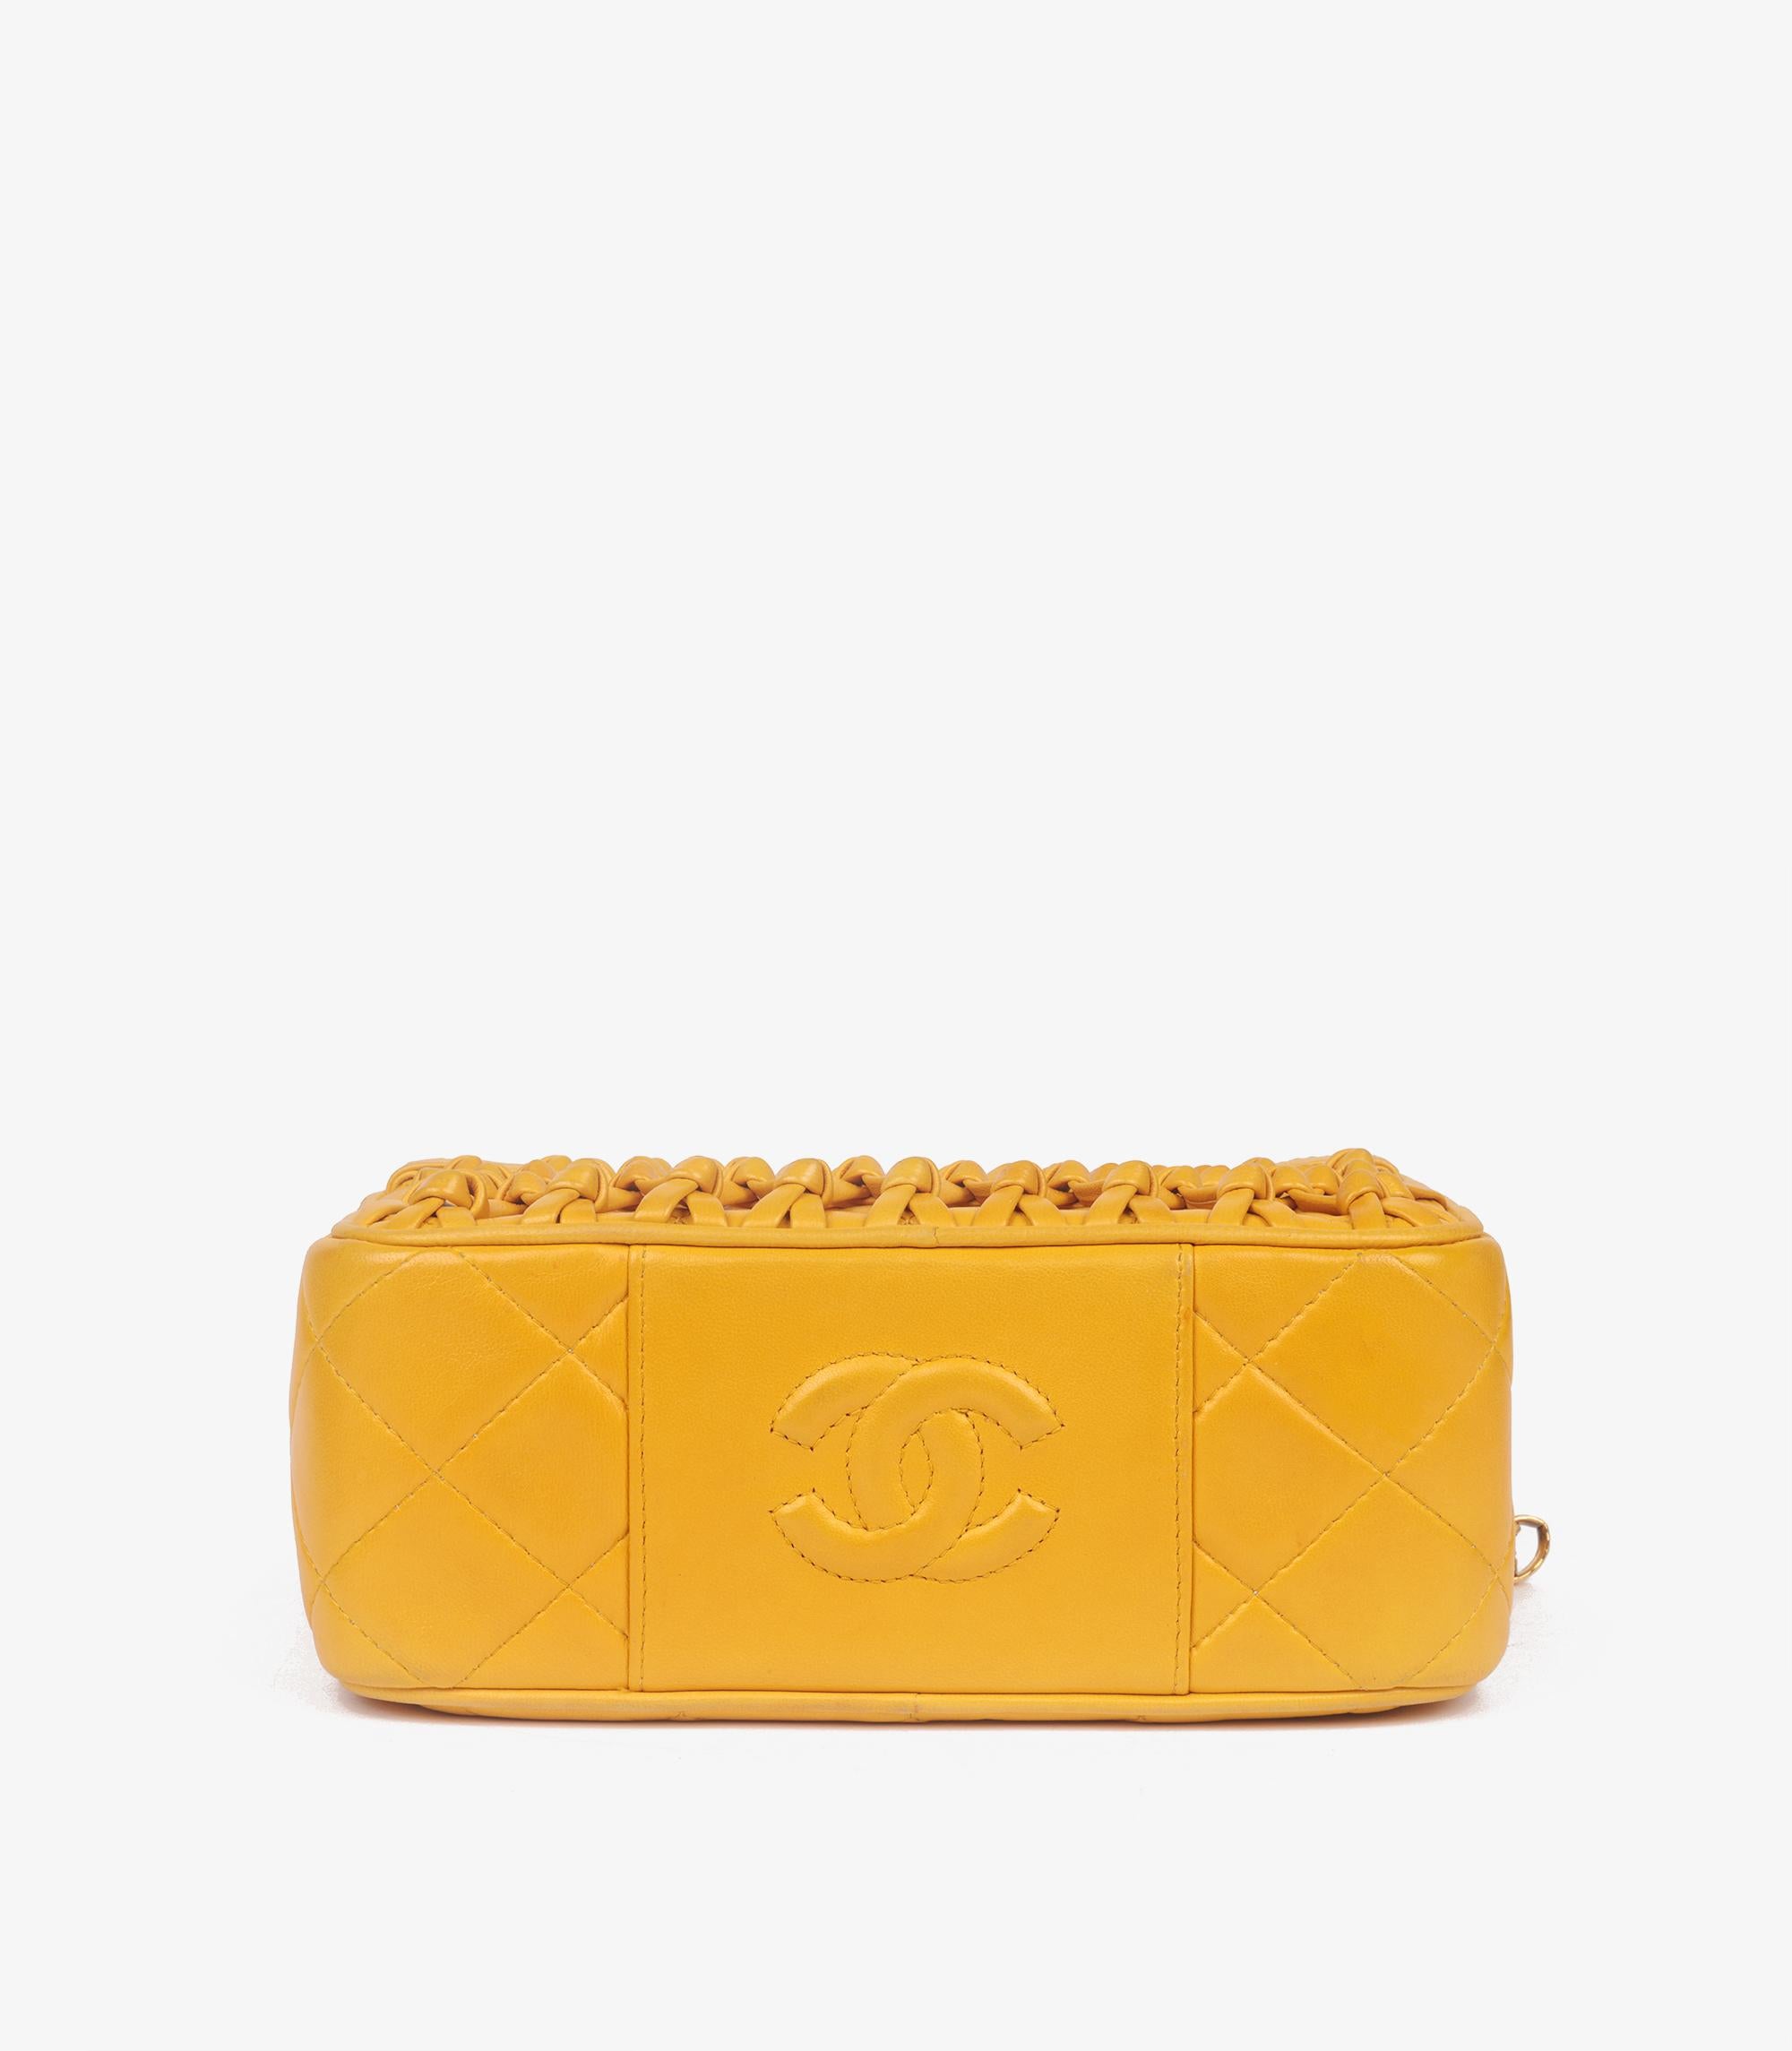 Chanel Yellow Quilted Lambskin Vintage Mini Camera Bag For Sale 4